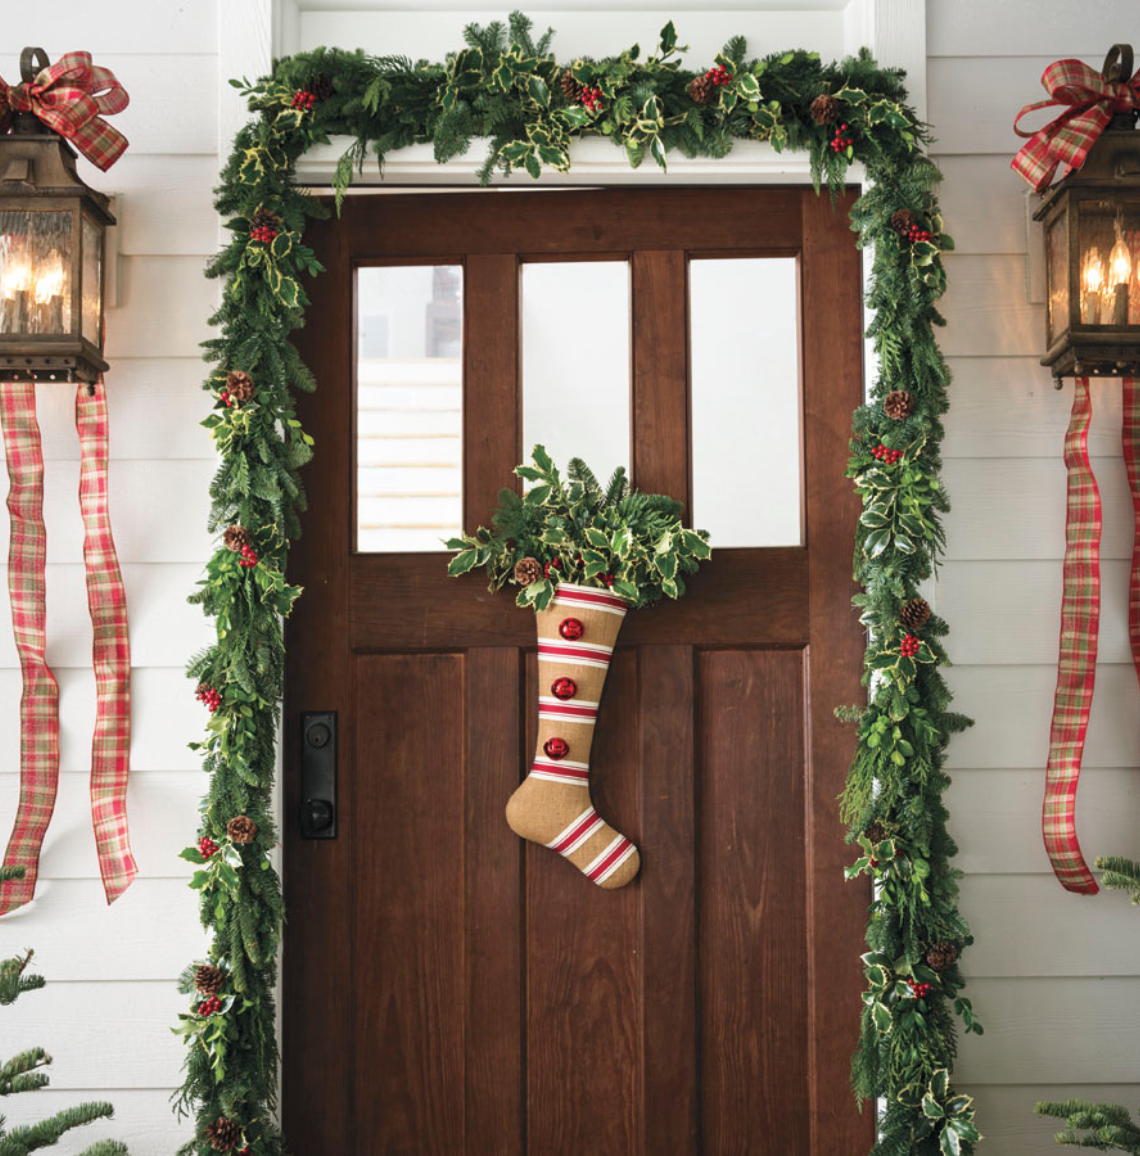 9 Christmas Front Door Decorations to Greet Your Holiday Guests Nostalgic Noble Fir Stocking Door #Christmas #ChristmasDecor #ChristmasStocking #ChristmasGatherings #FamilyGatherings #FrontDoorDecor #PorchDecor